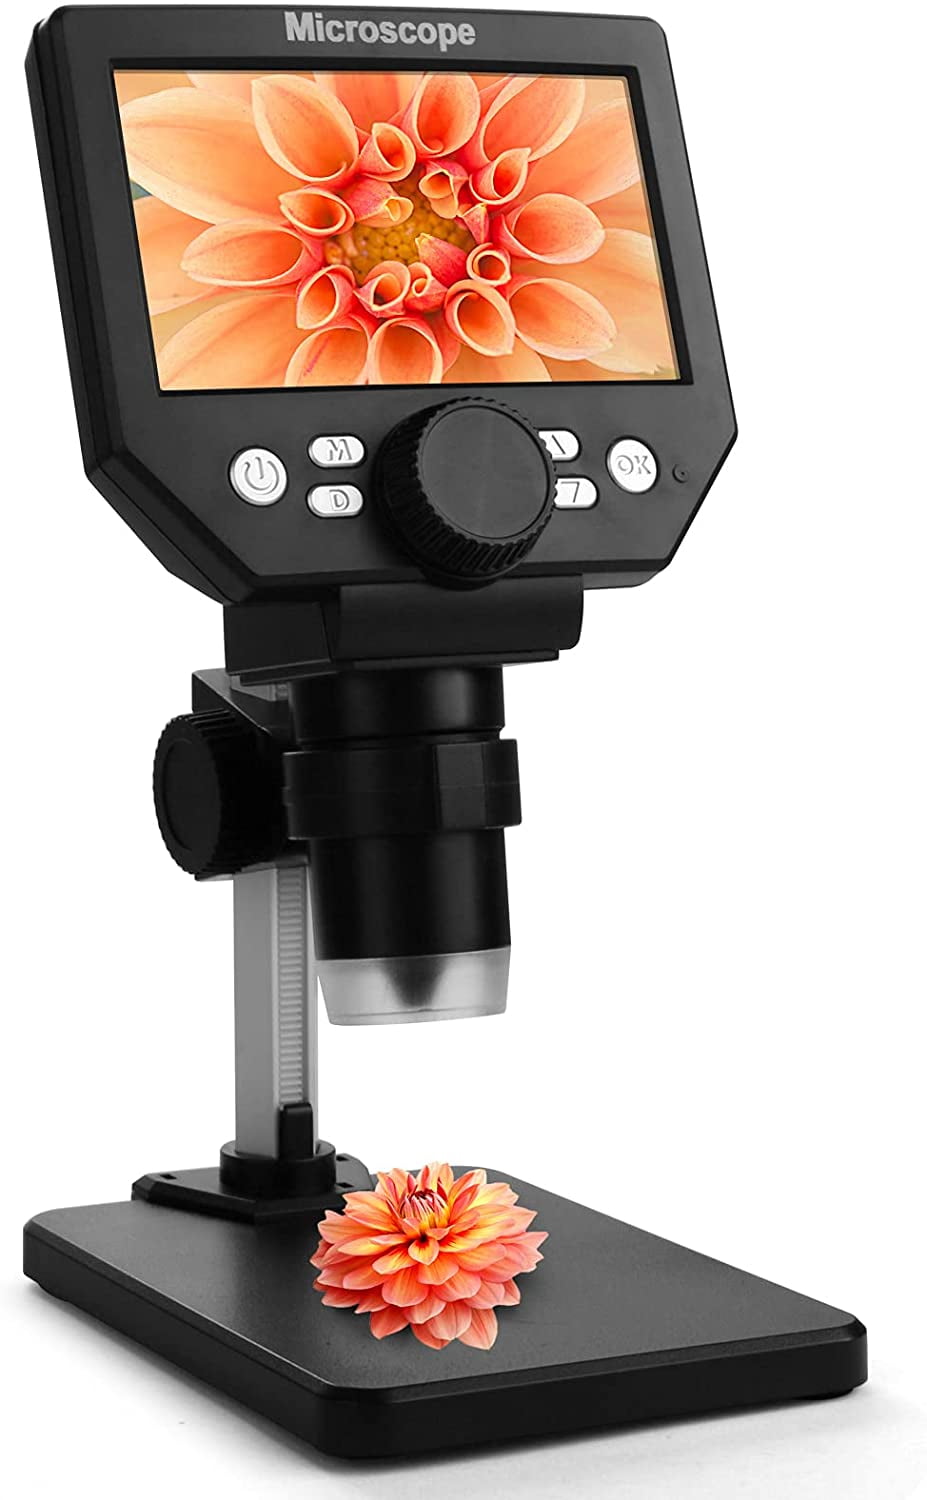 4.3 Digital 1080P Microscope 10X-600X Magnification Zoom,8 LED Adjustable Light,Rechargeable Lithium Battery,Support Storage,Camera Video Recorder 